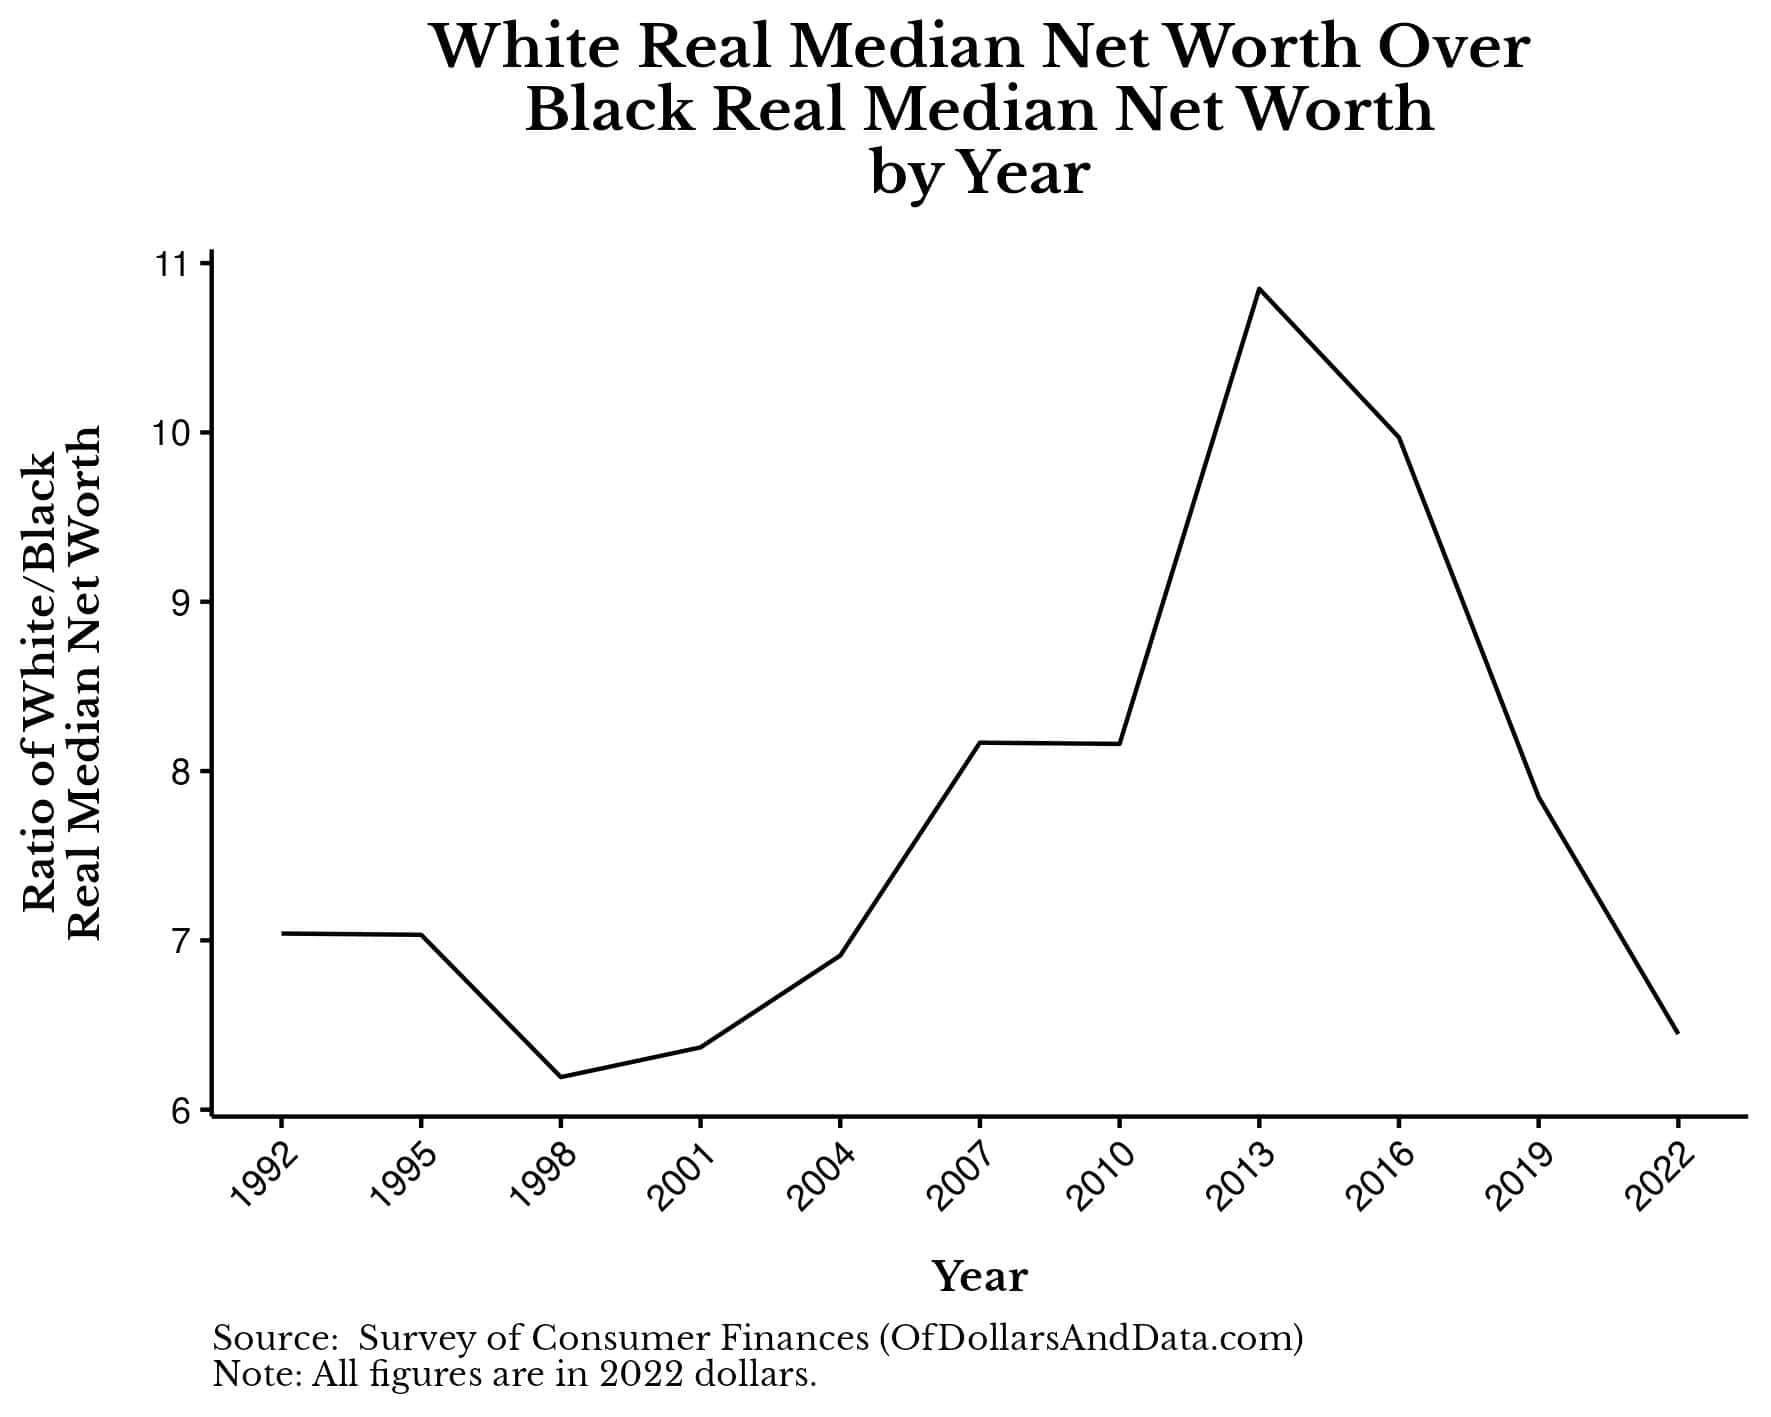 Chart showing white over black real median net worth from 1992 to 2022.